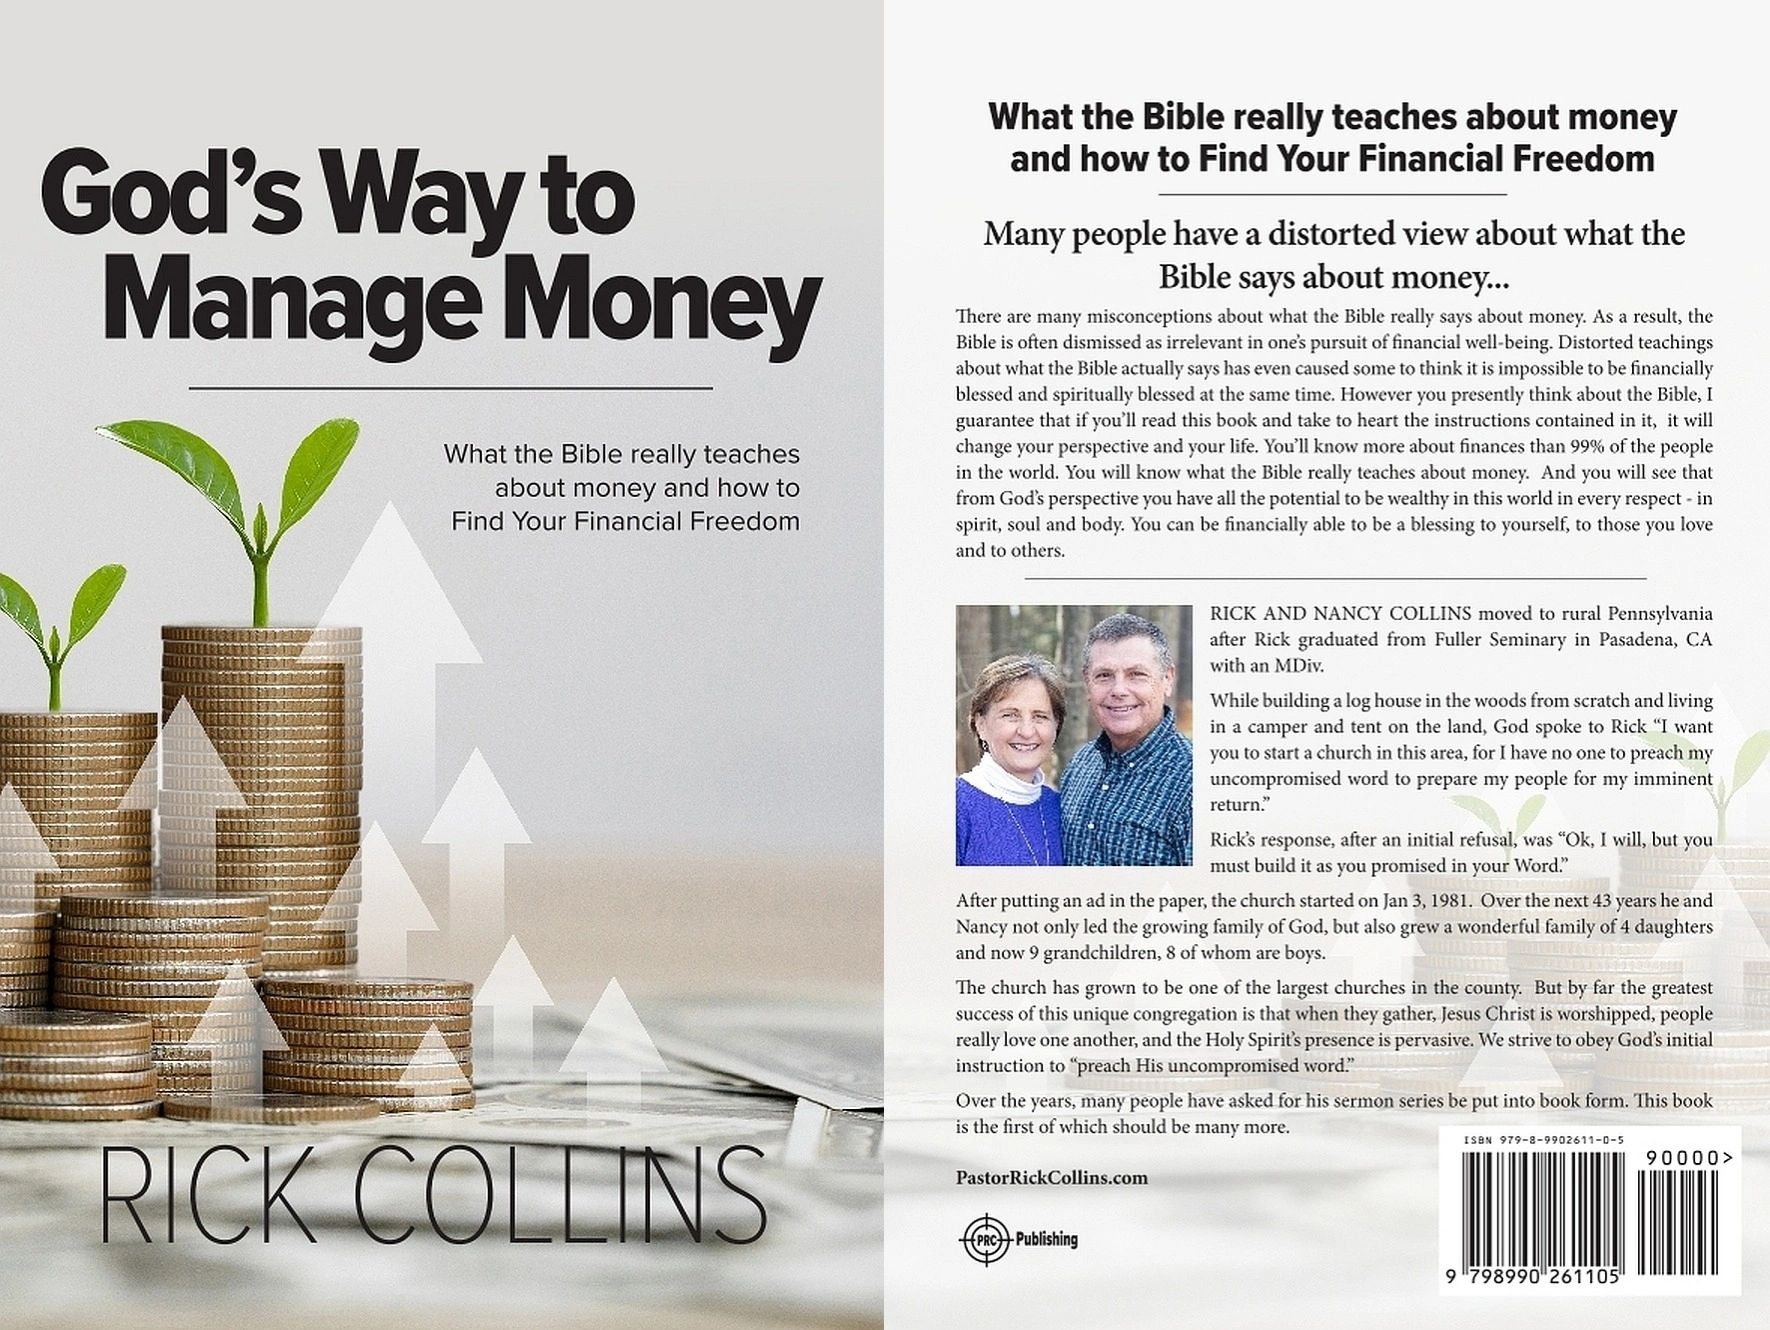 Book: God's Way to Manage Money